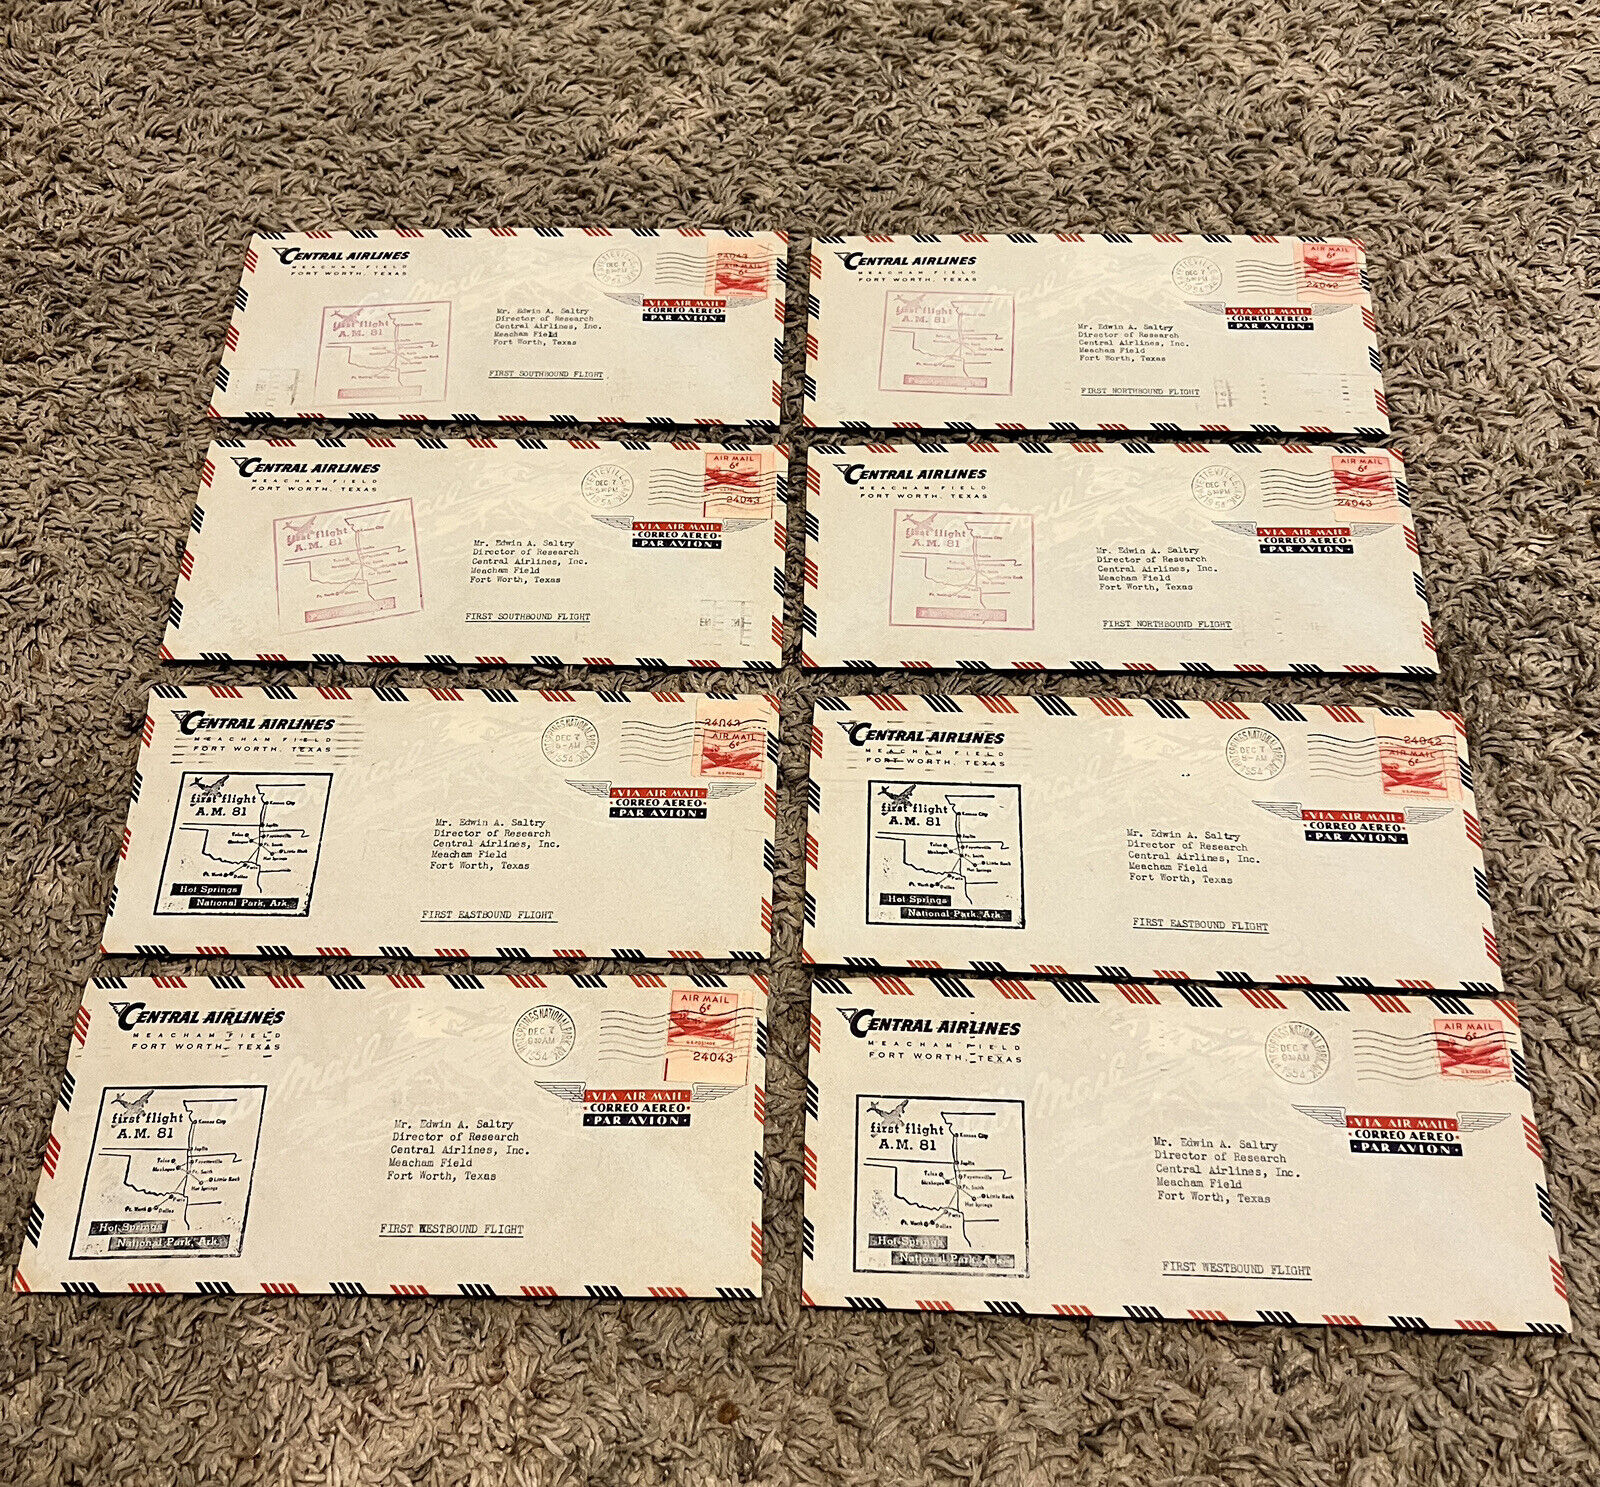 1954 CENTRAL AIRLINES INVESTOR LOT OF 8 HOT SPRINGS NATIONAL PARK COVERS 